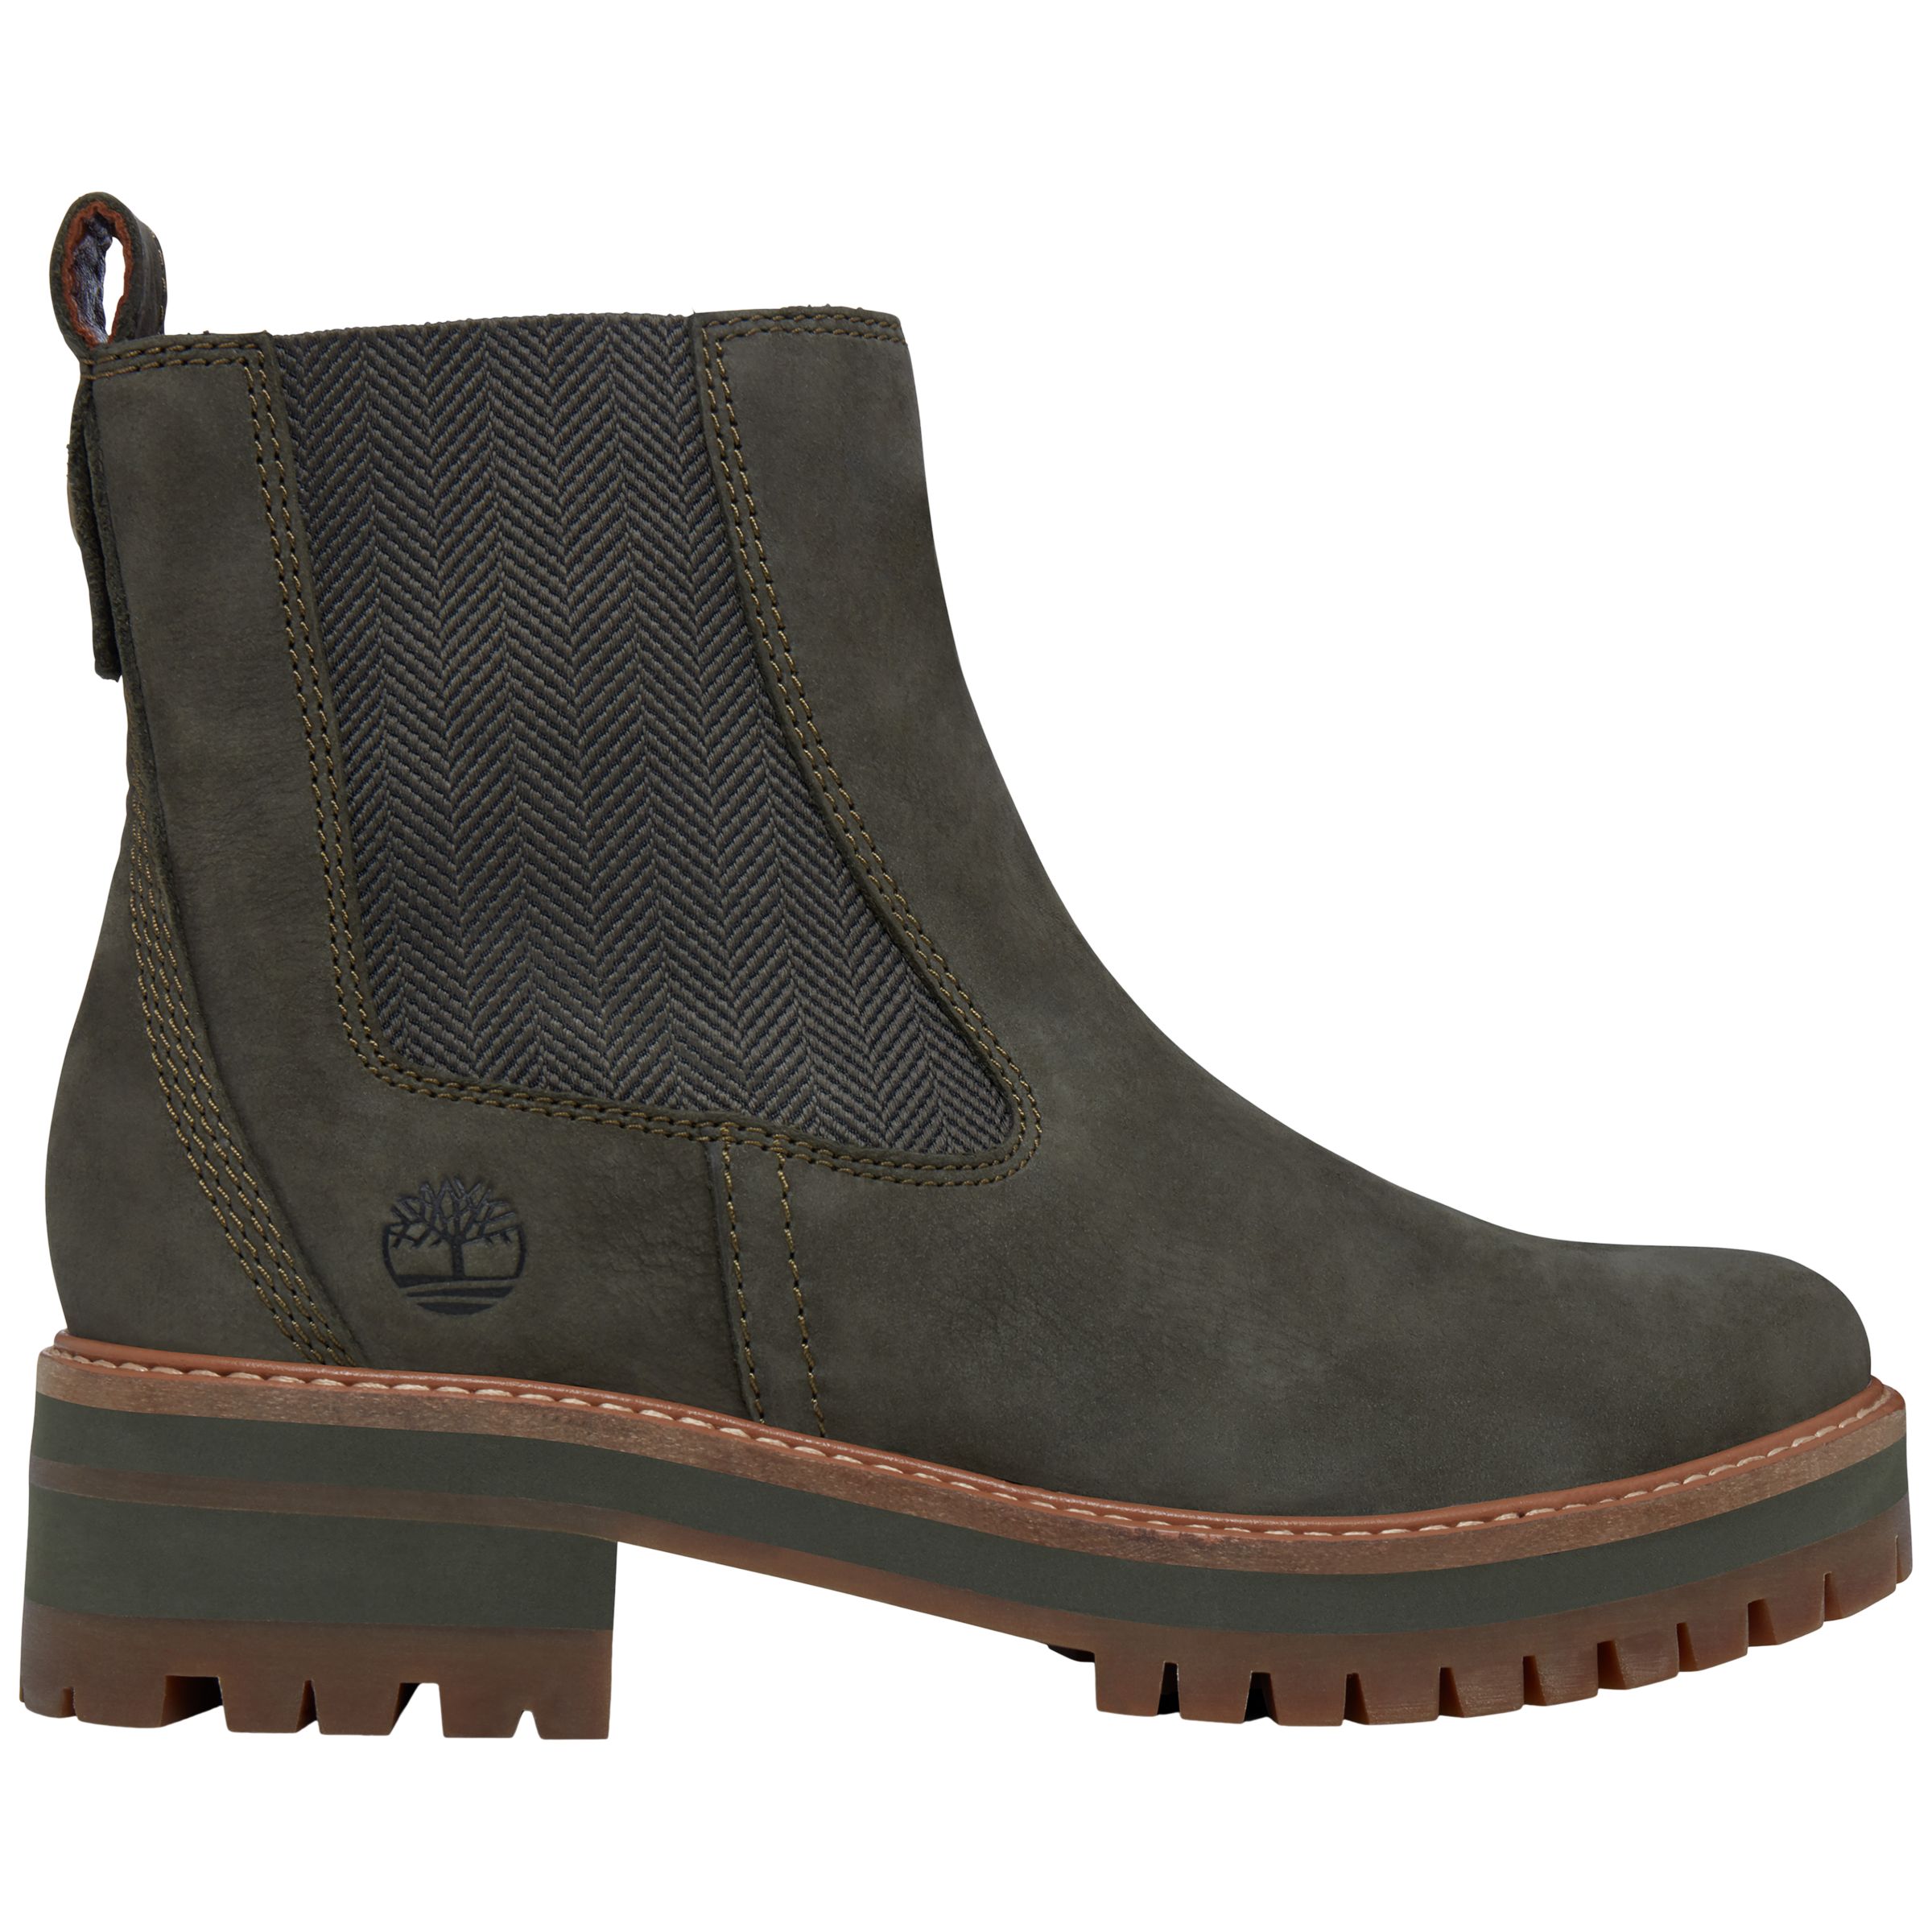 Timberland Courmayeur Valley Chelsea Boots, Olive at John Lewis & Partners